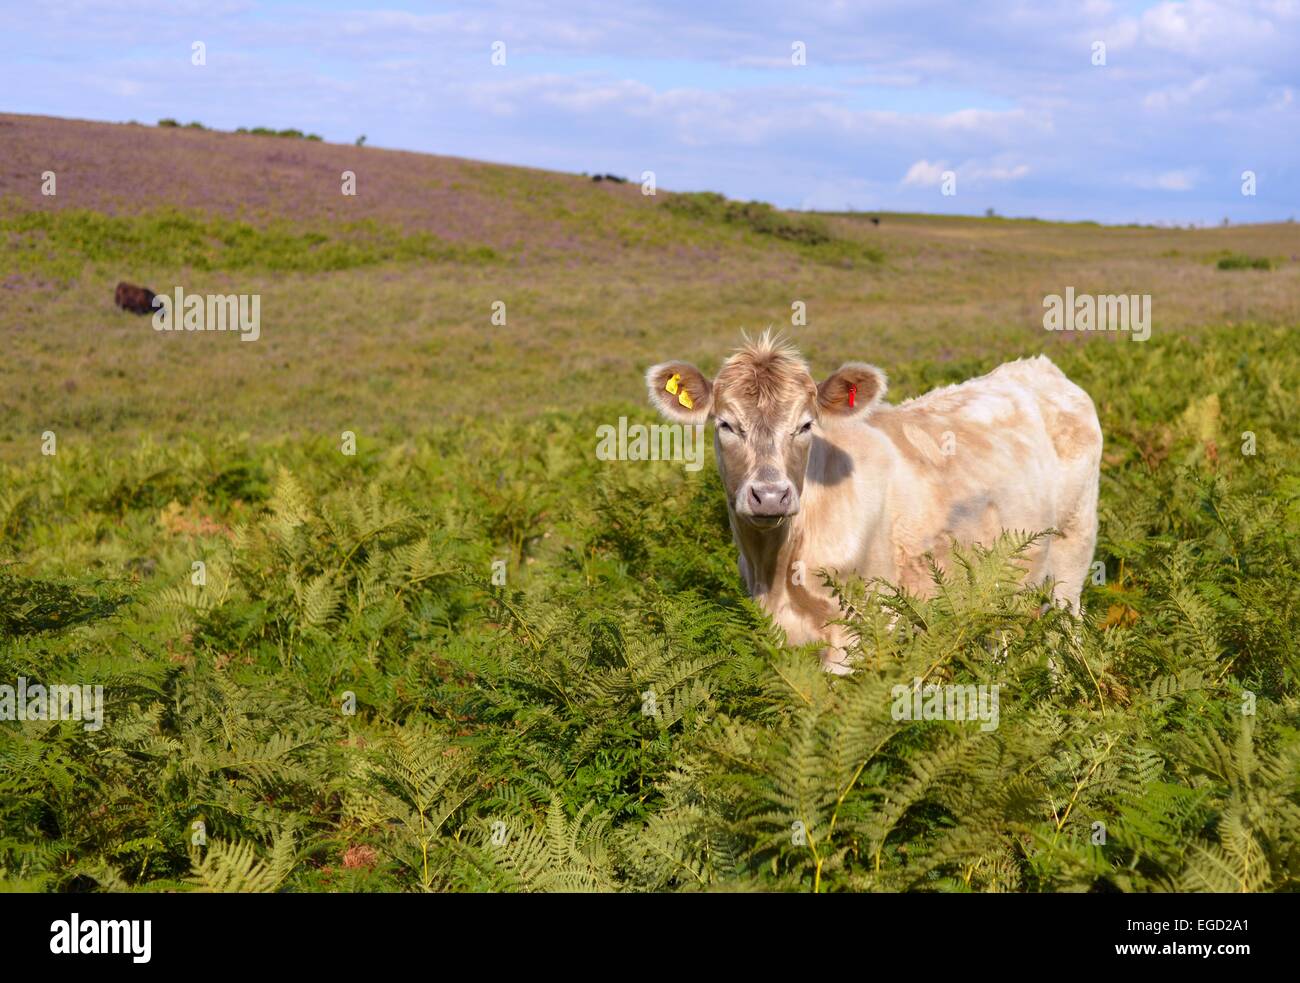 Cute Jersey cow calf with big ears standing in bracken in open space, New Forest, Hampshire, UK Stock Photo